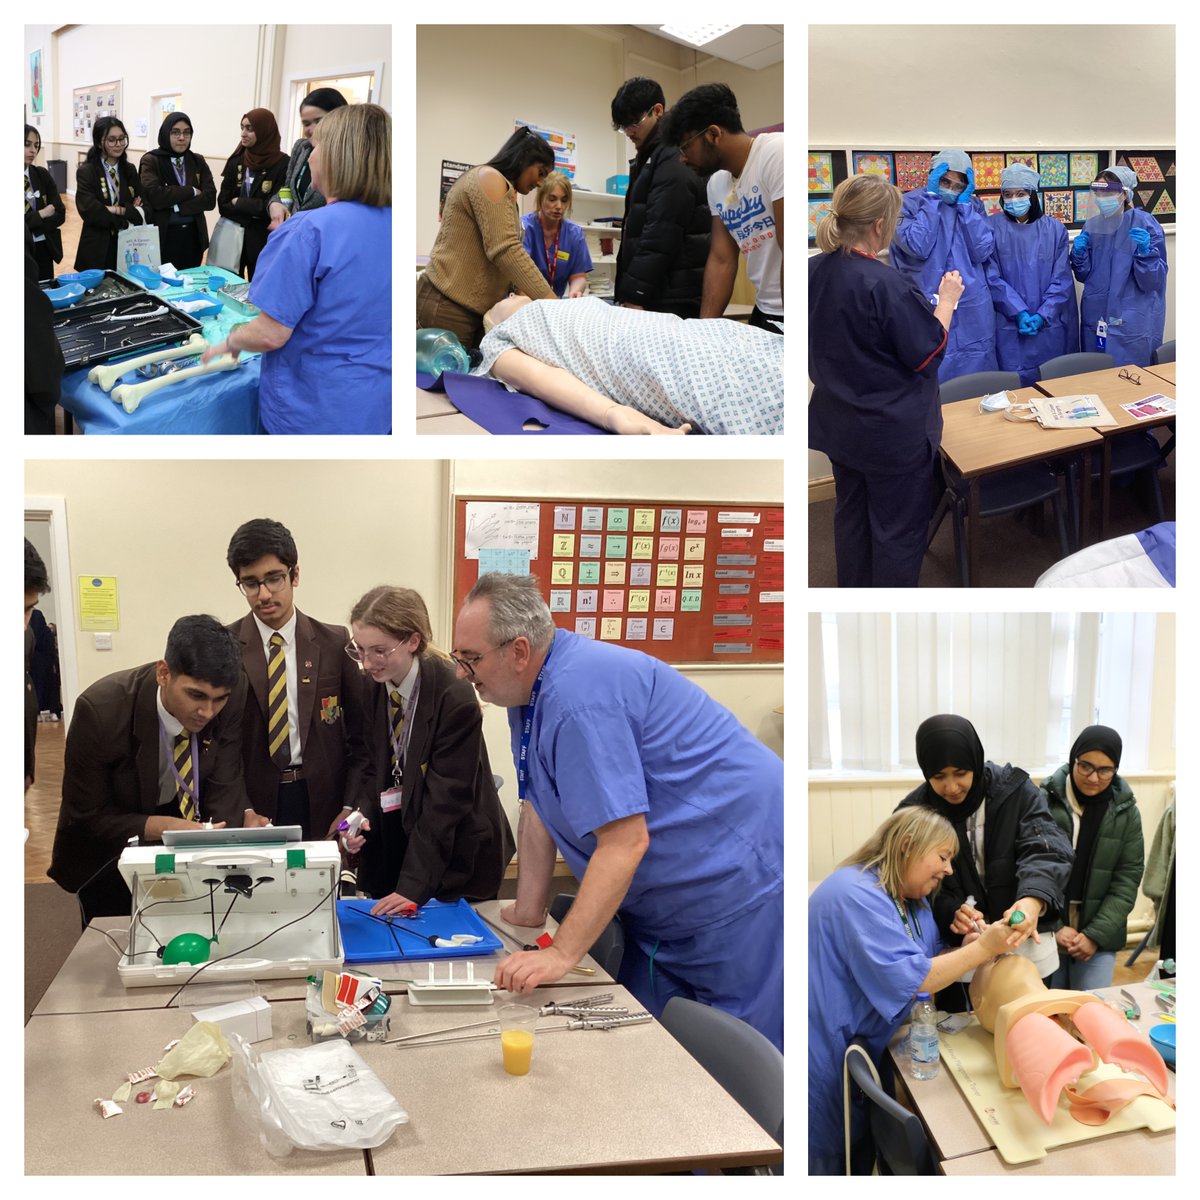 More snaps from our '#NHS: A #Career in #Surgery' event at @HeckGrammar. 

Fantastic to see pupils get stuck in with CPR, laparoscopy and cannulation demonstrations, as well as practicing their dressing skills and interview techniques. 
🩺🧑‍⚕️💉👩‍⚕️🏥

#ElectiveSurgery #WYAAT